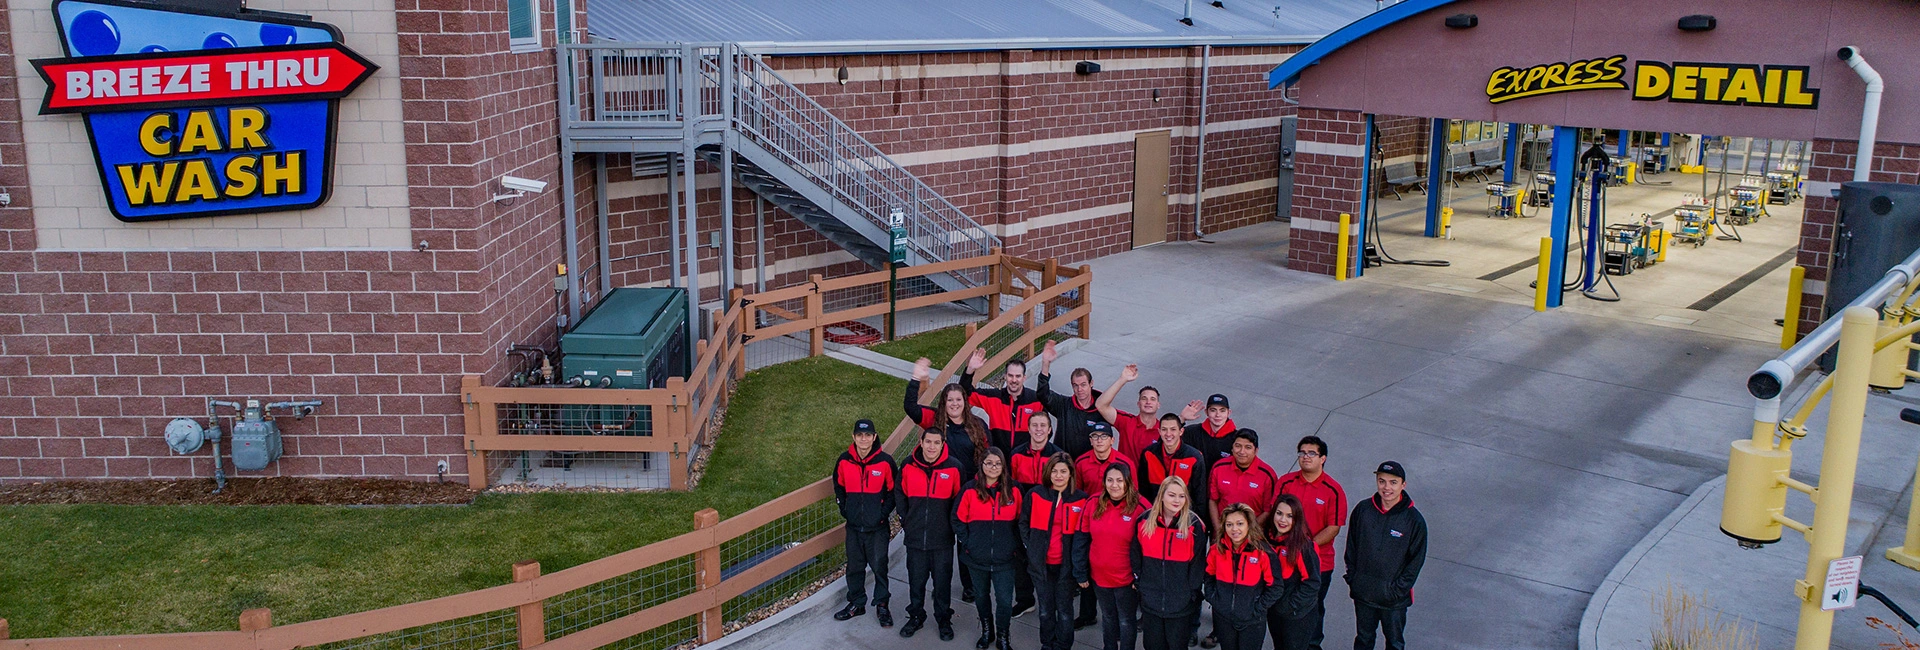 A group of employees in red and black uniforms standing in front of a car wash facility with signs reading "breeze thru car wash" and "express detail.